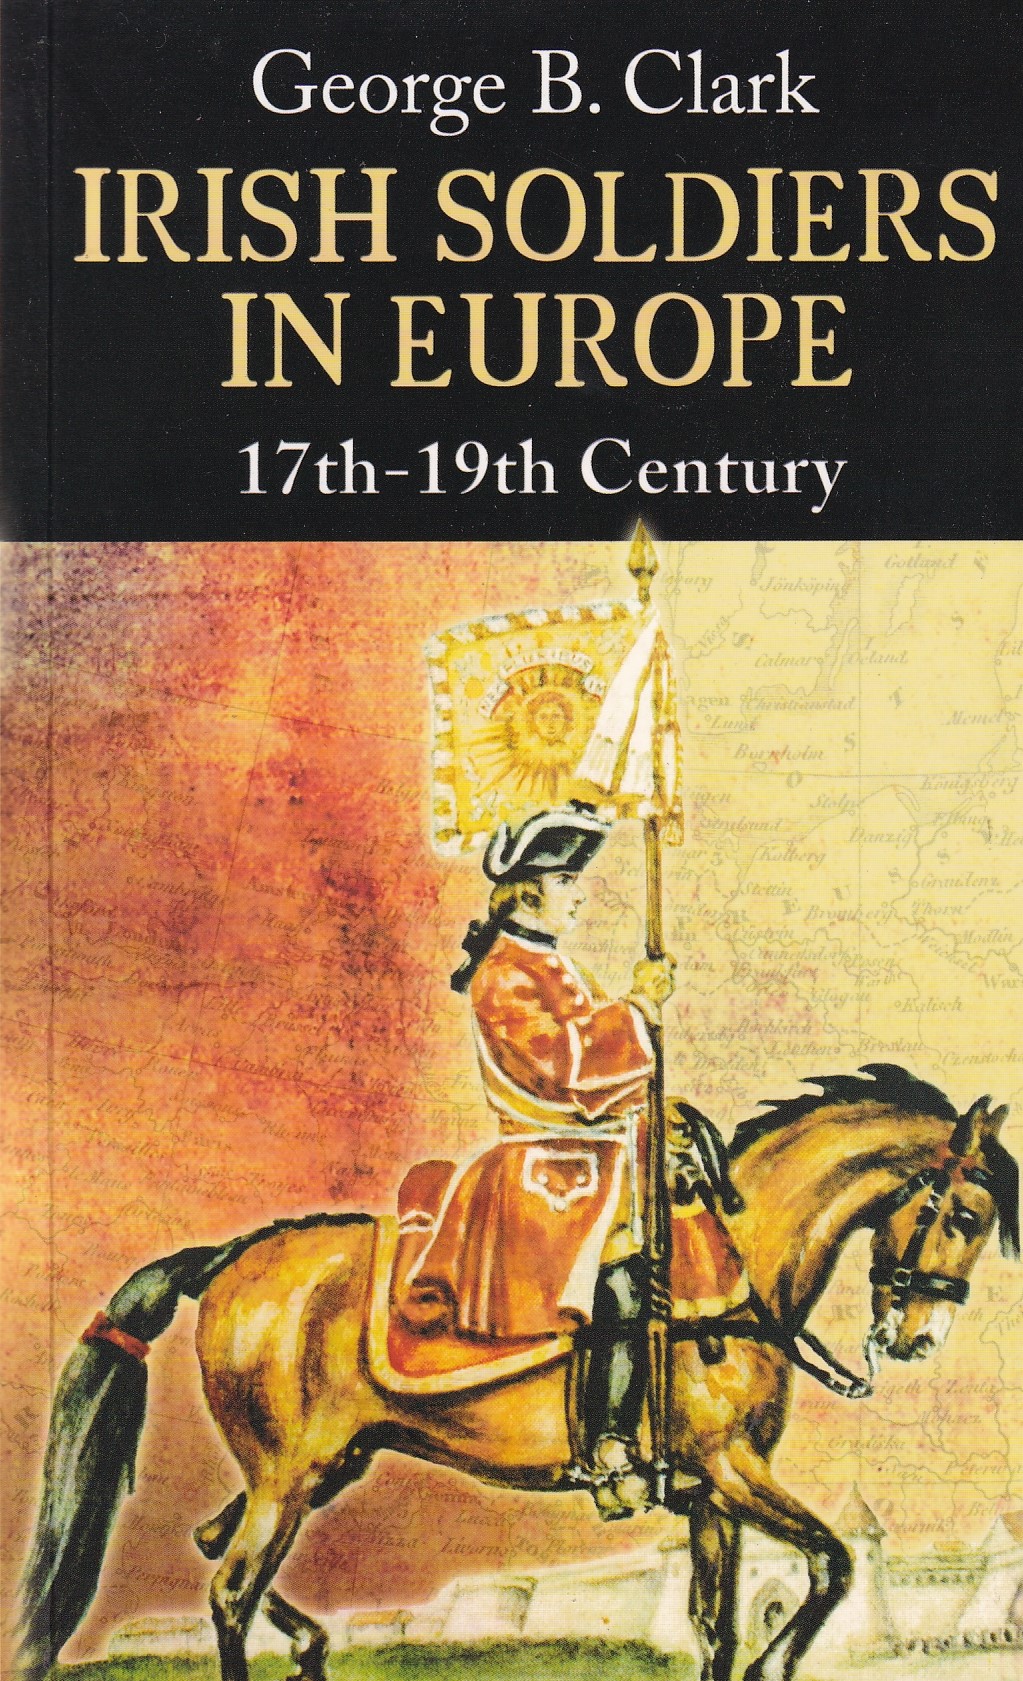 Irish Soldiers in Europe: 17th-19th Century | George B. Clark | Charlie Byrne's